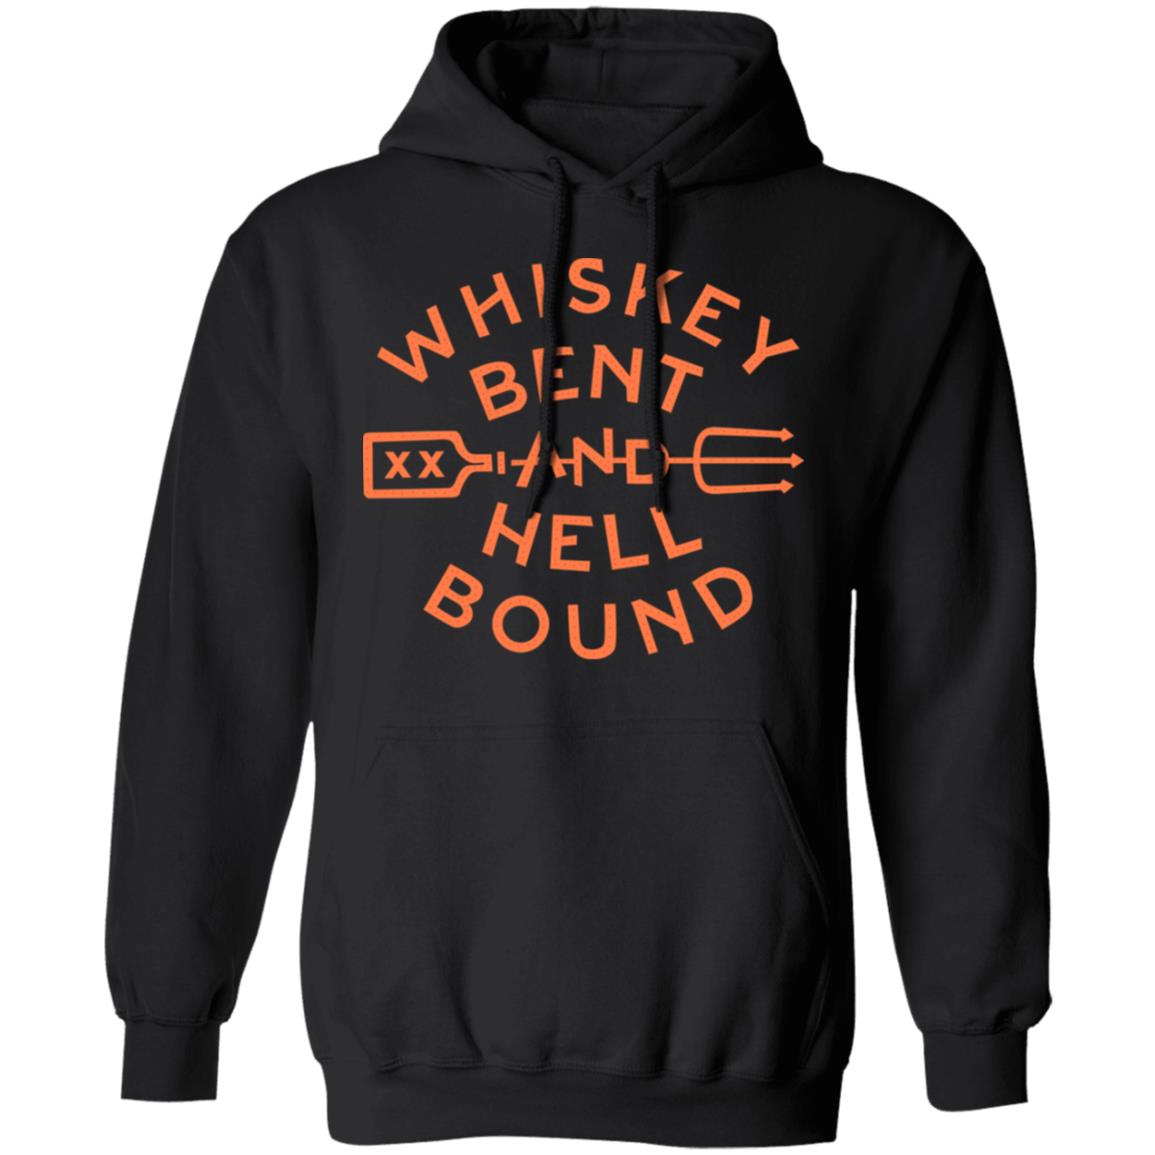 whiskey bent hell bound